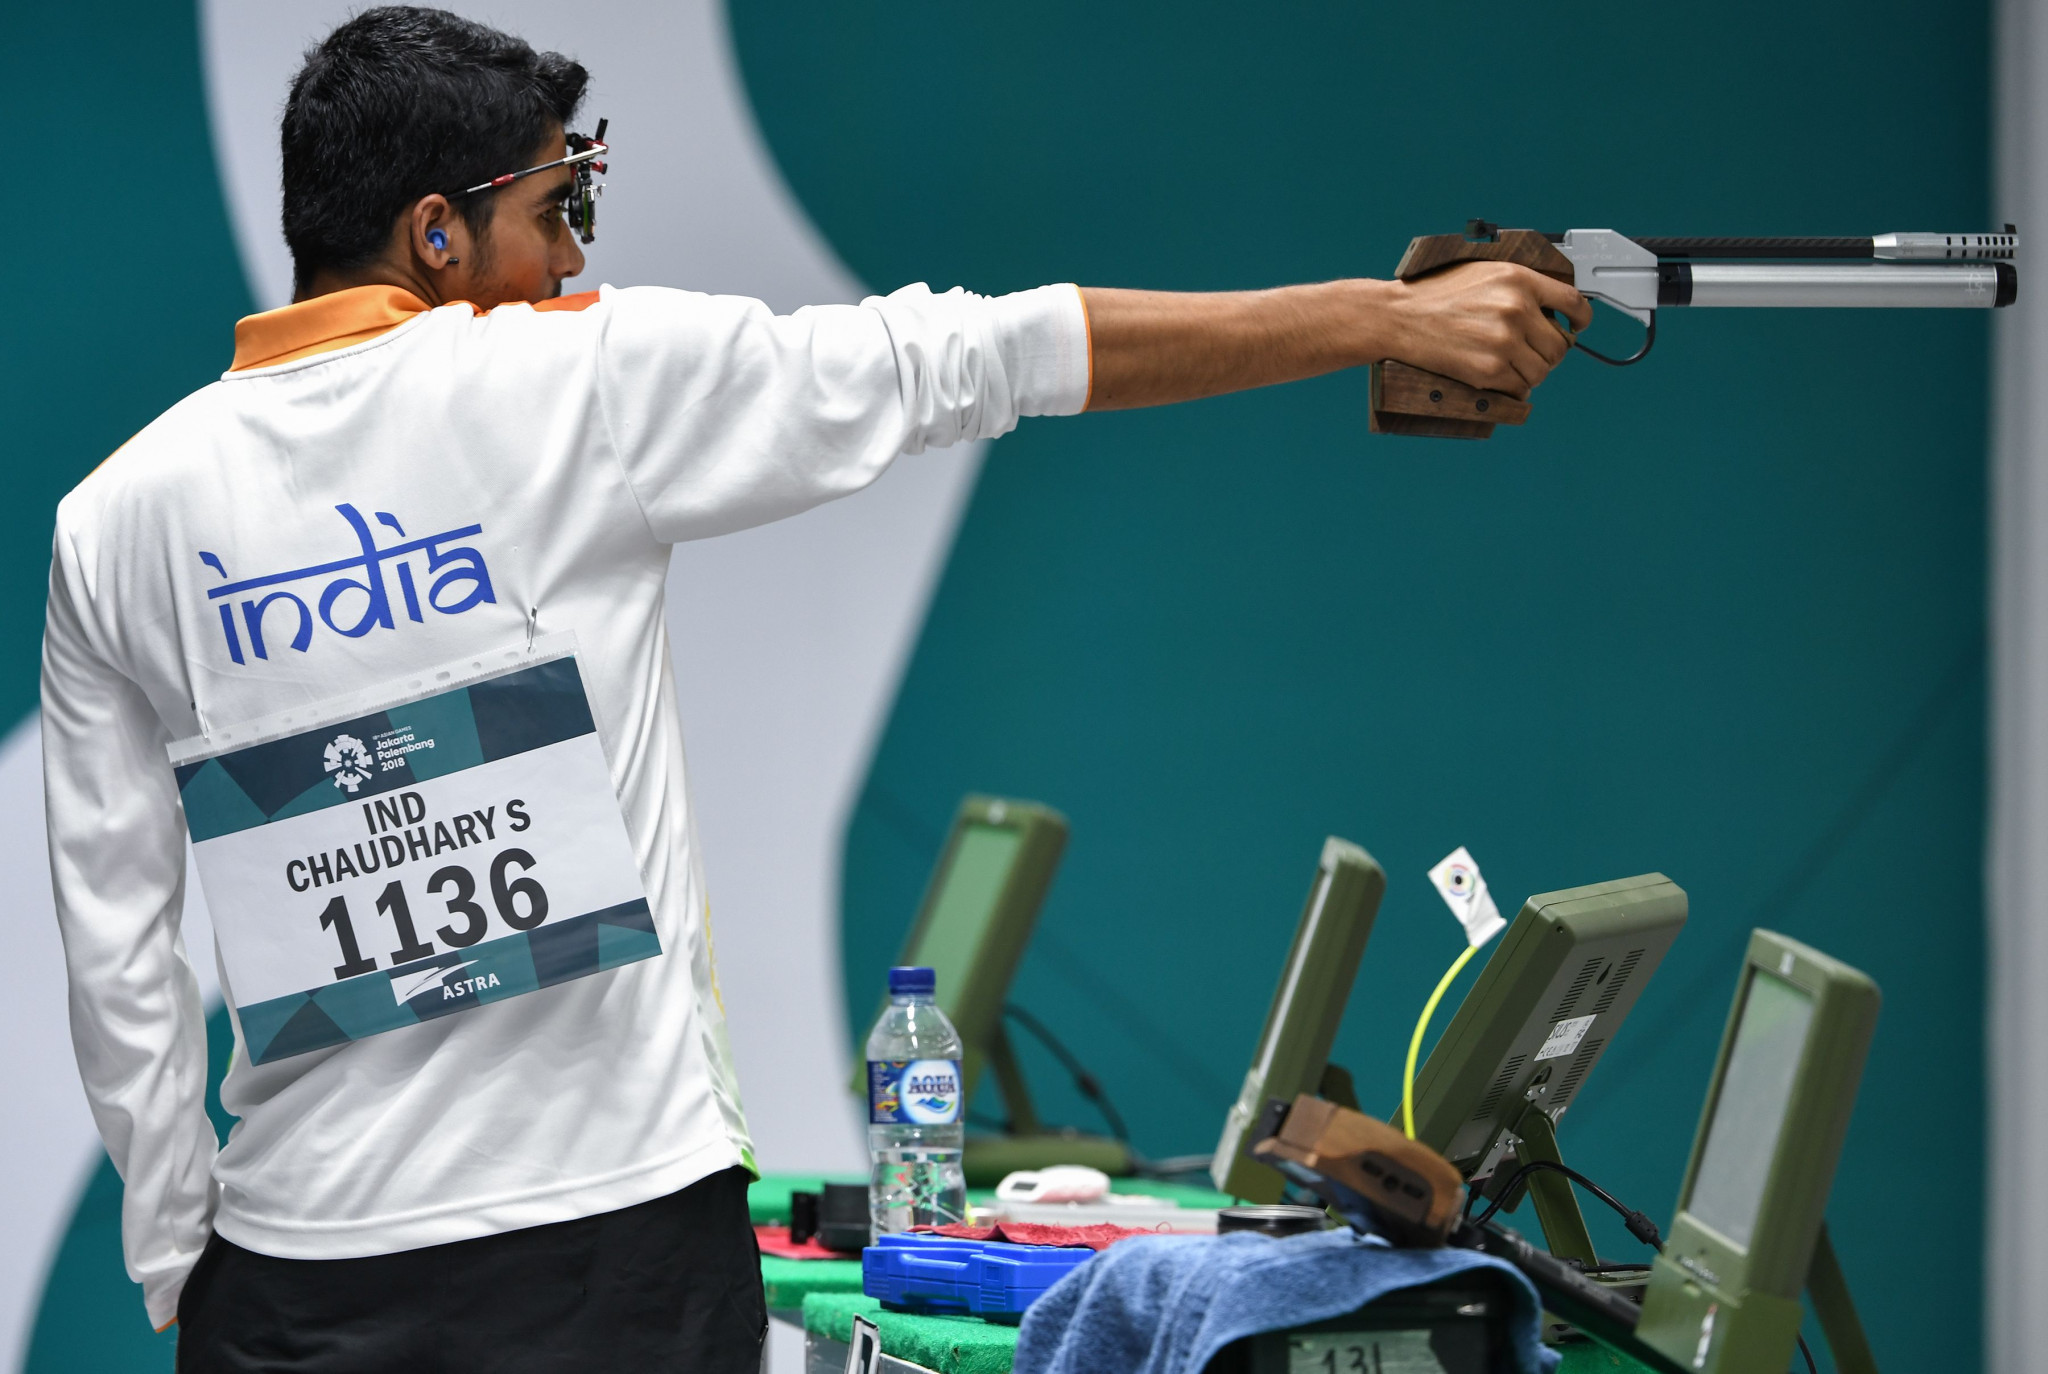 India's Saurabh Chaudhary won the men's 10m air pistol final at the age of just 16 years and 101 days, making him the youngest shooting champion since 2006 ©Getty Images